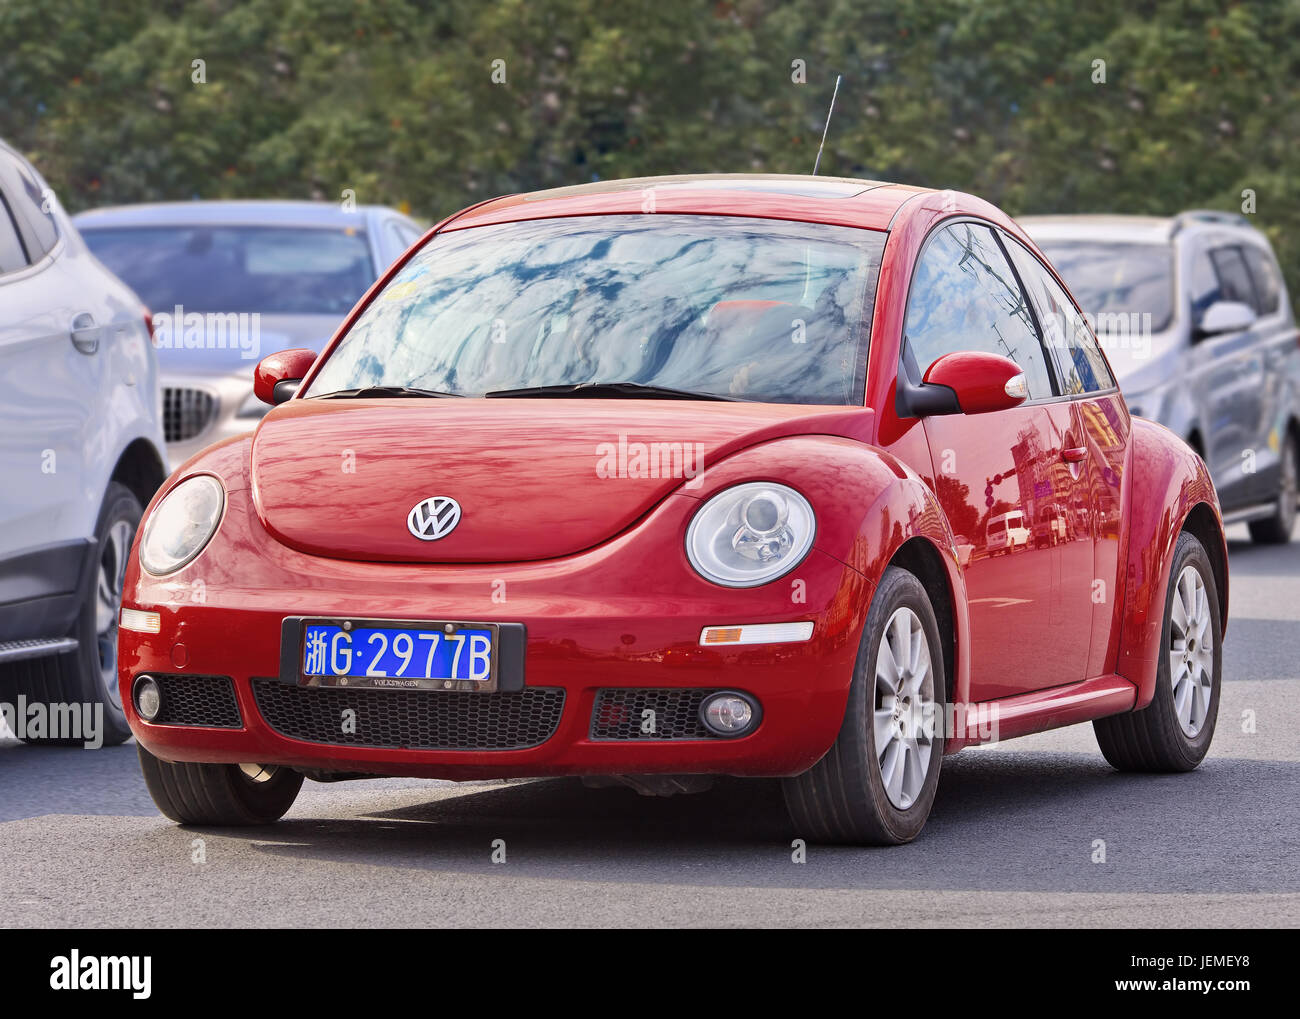 Red Volkswagen Beetle. China is the place where VW CEO Matthias Mueller can enjoy a brief respite from its recent diesel emissions scandal. Stock Photo